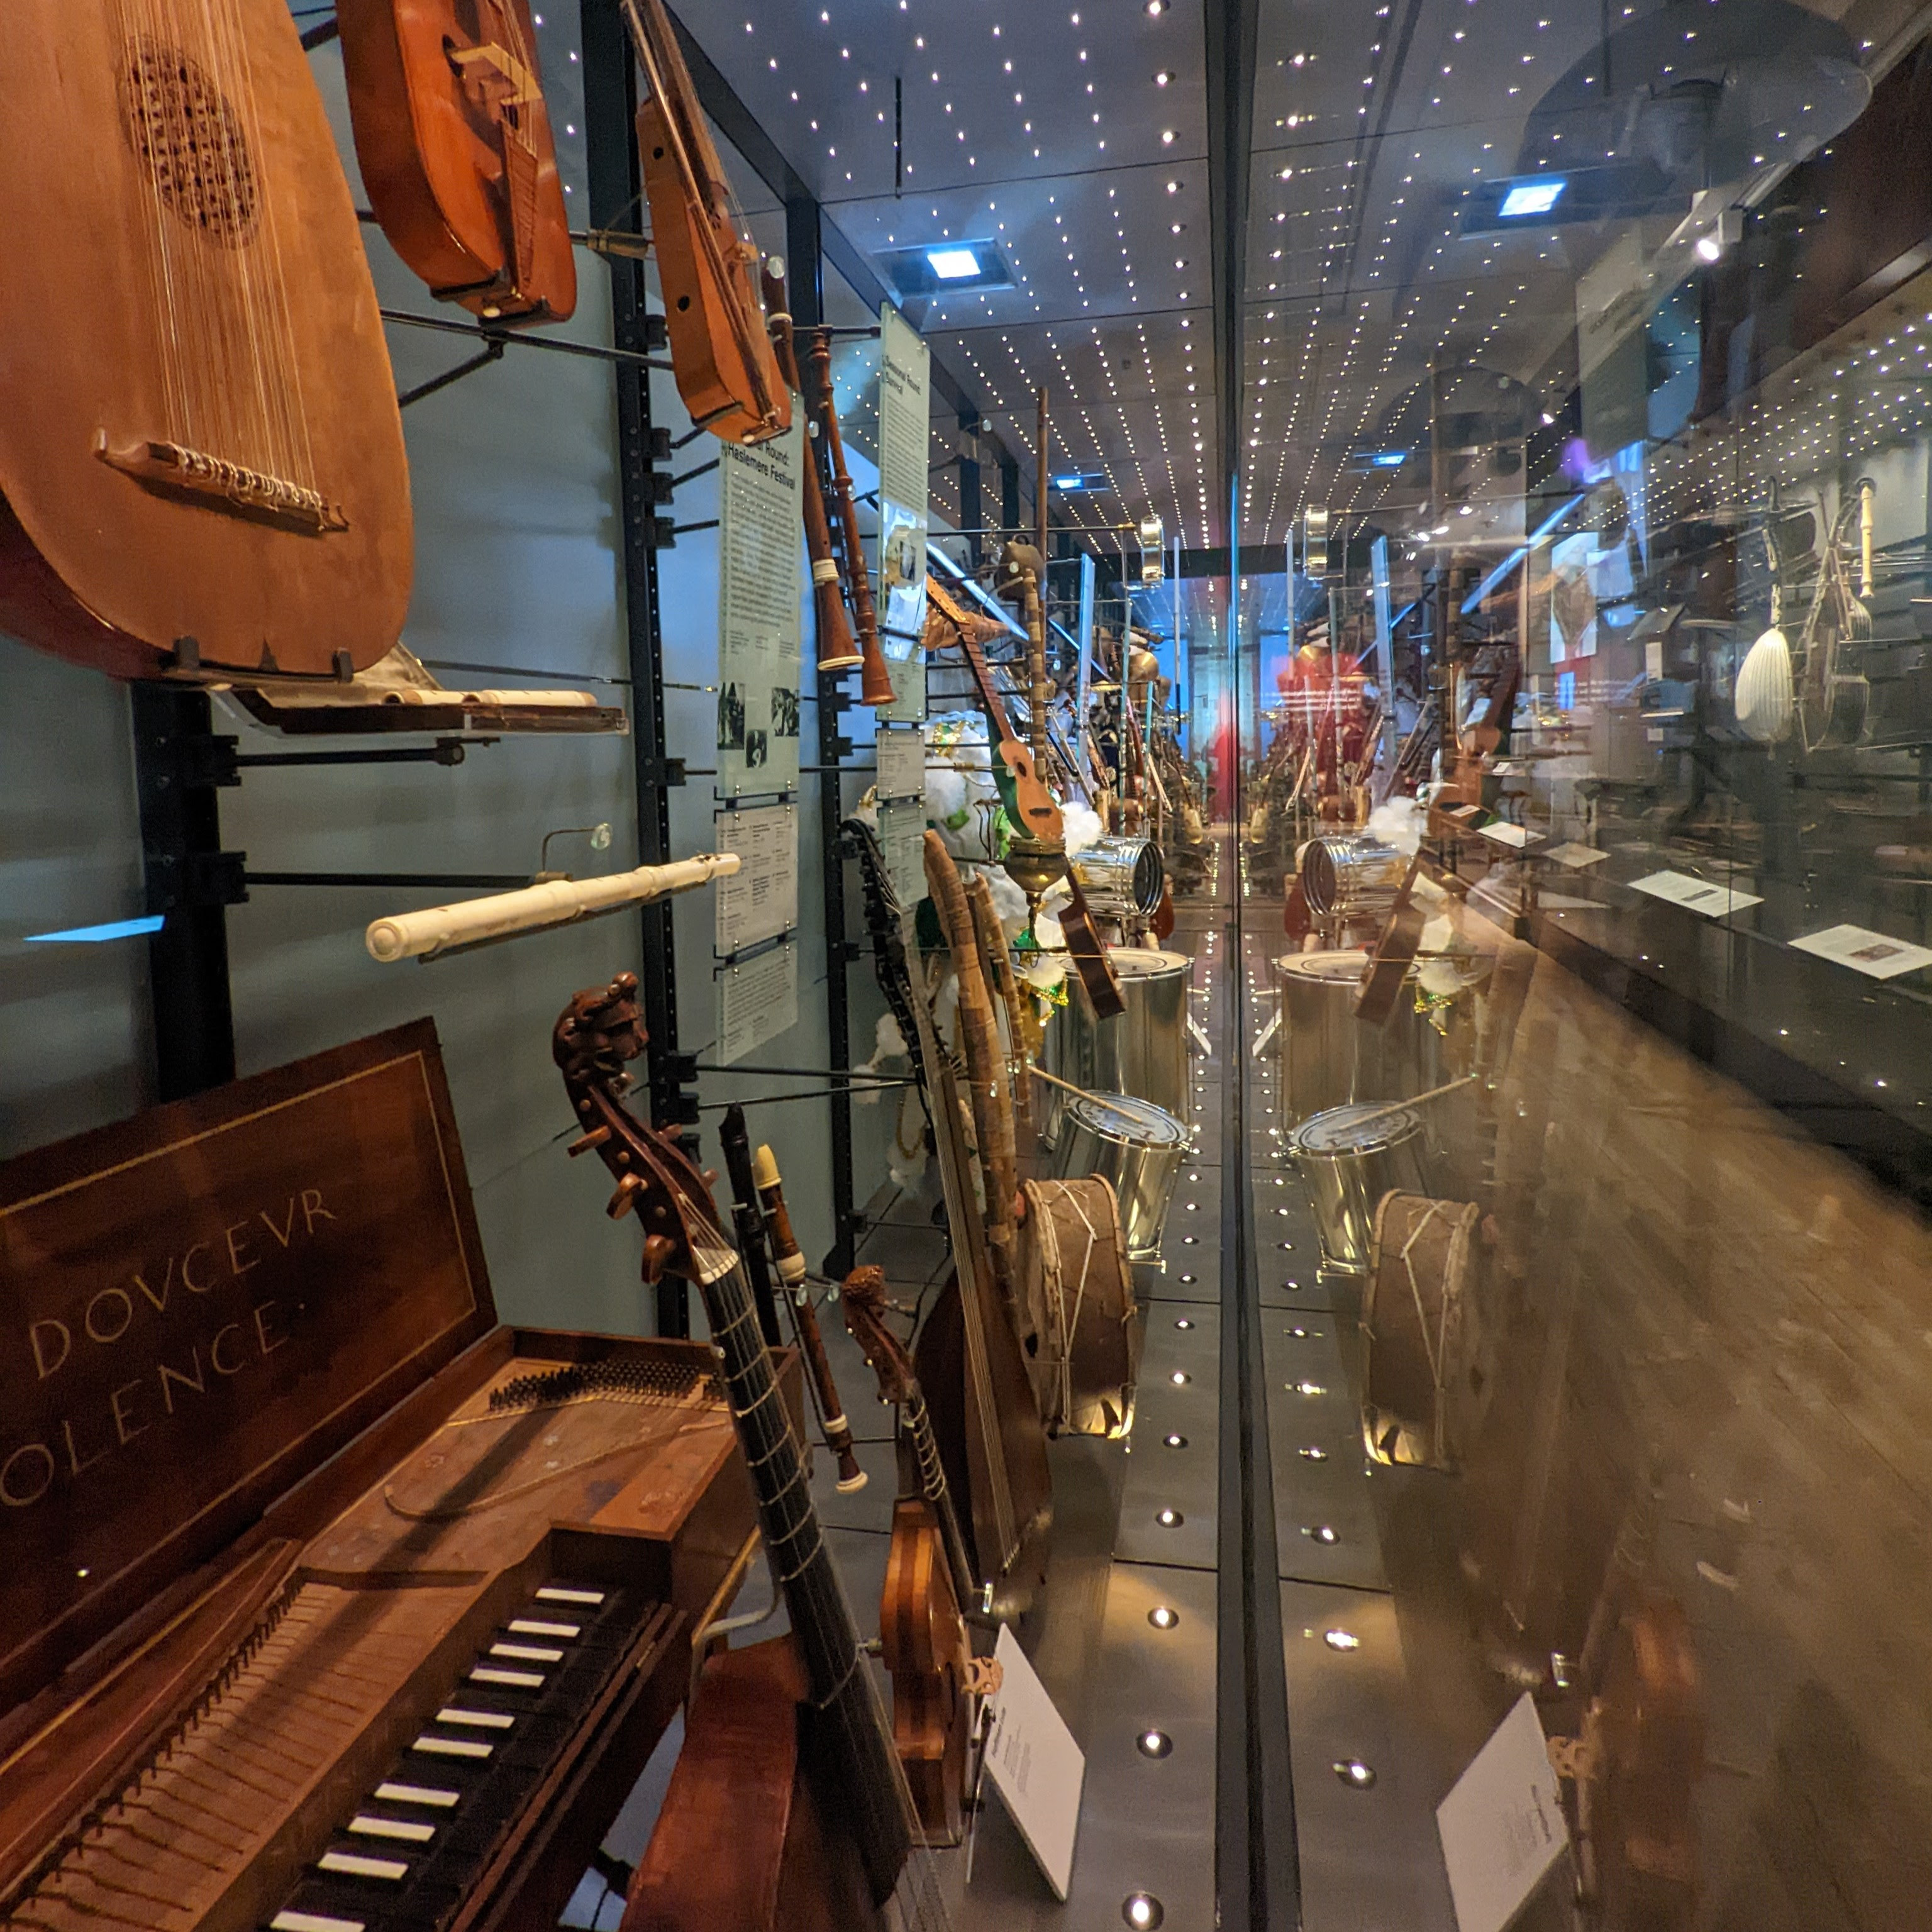 A display of stringed instruments in a glass case 